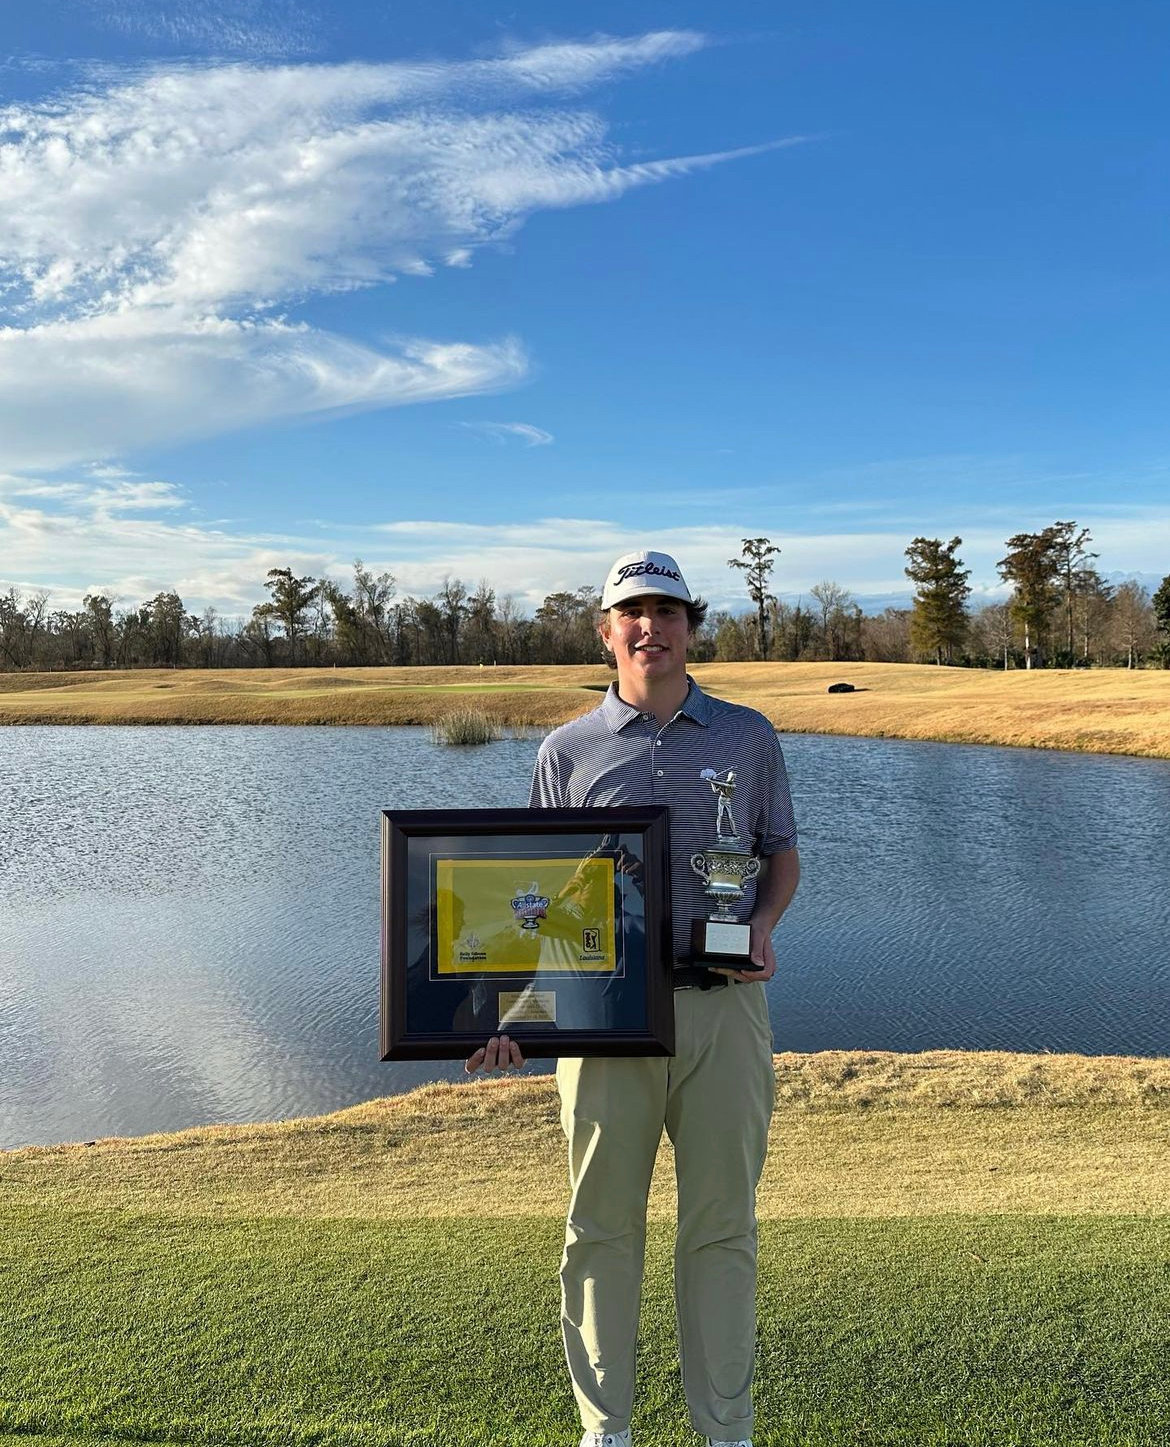 Fairhope’s Trip Duke walked away with the Allstate Sugar Bowl Tommy Moore Memorial championship from TPC Louisiana earlier this week to finish the 2022 campaign on a high note. It served as his third straight win in the last two months after winning the Southeastern Junior Golf Tour’s Player of the Year award for the season.